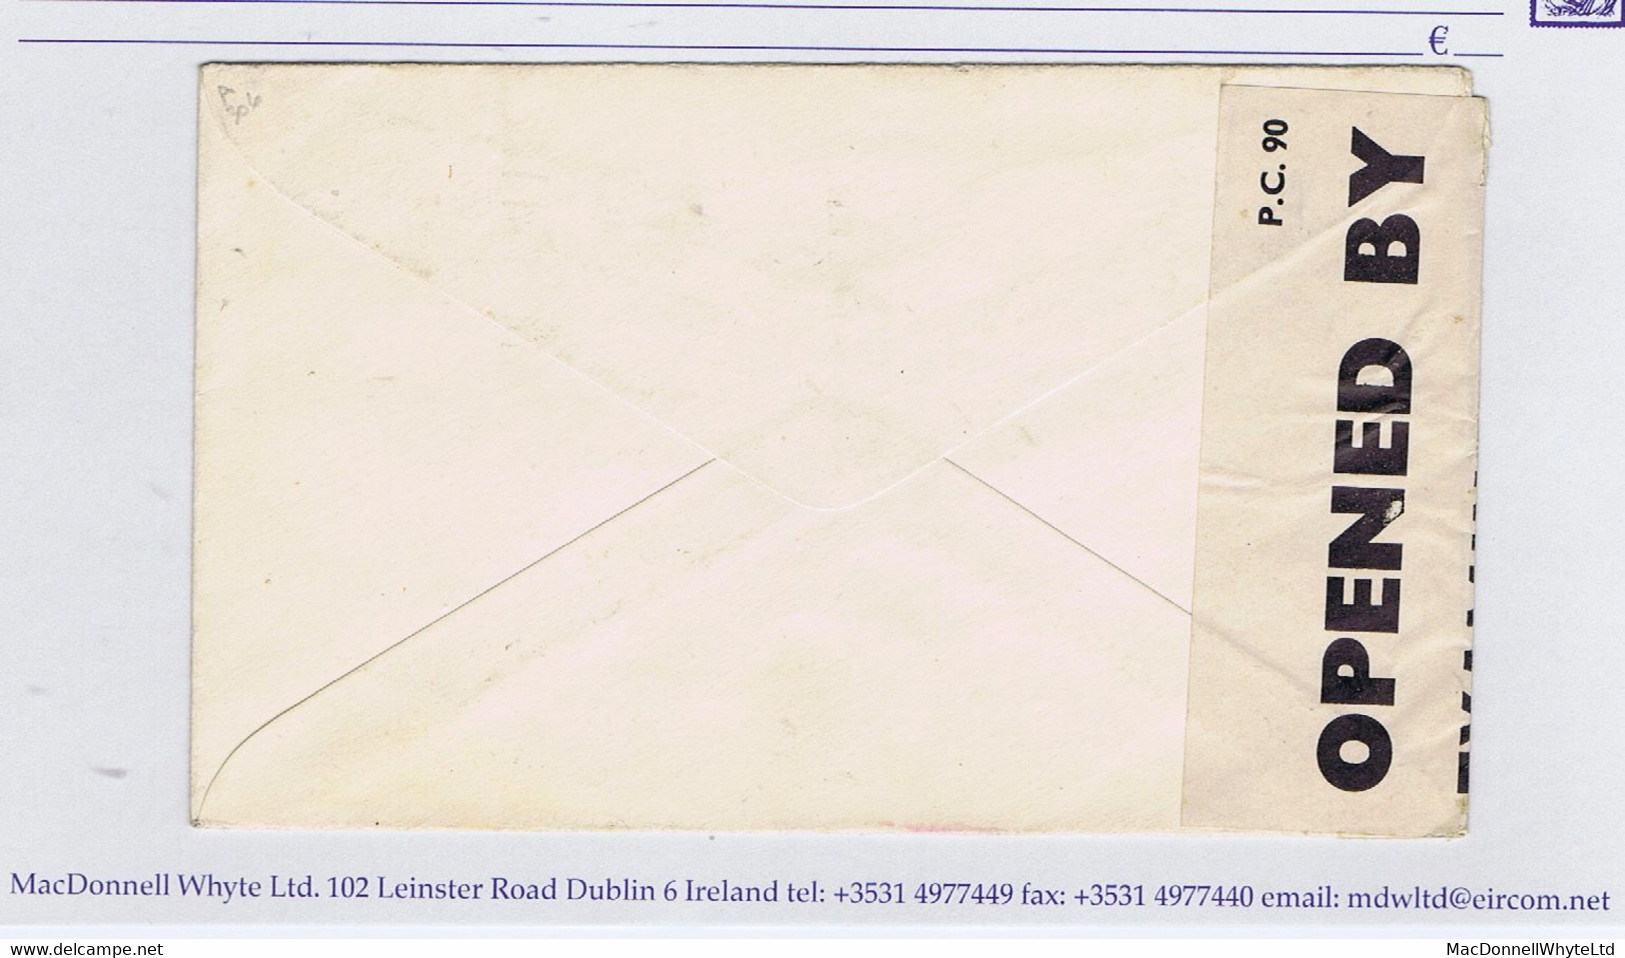 Ireland Airmail Censor Acceleration 1941 Liverpool To Belfast Wartime Civilian First Flight, Cover St Albans Paid 3d Air - Luftpost